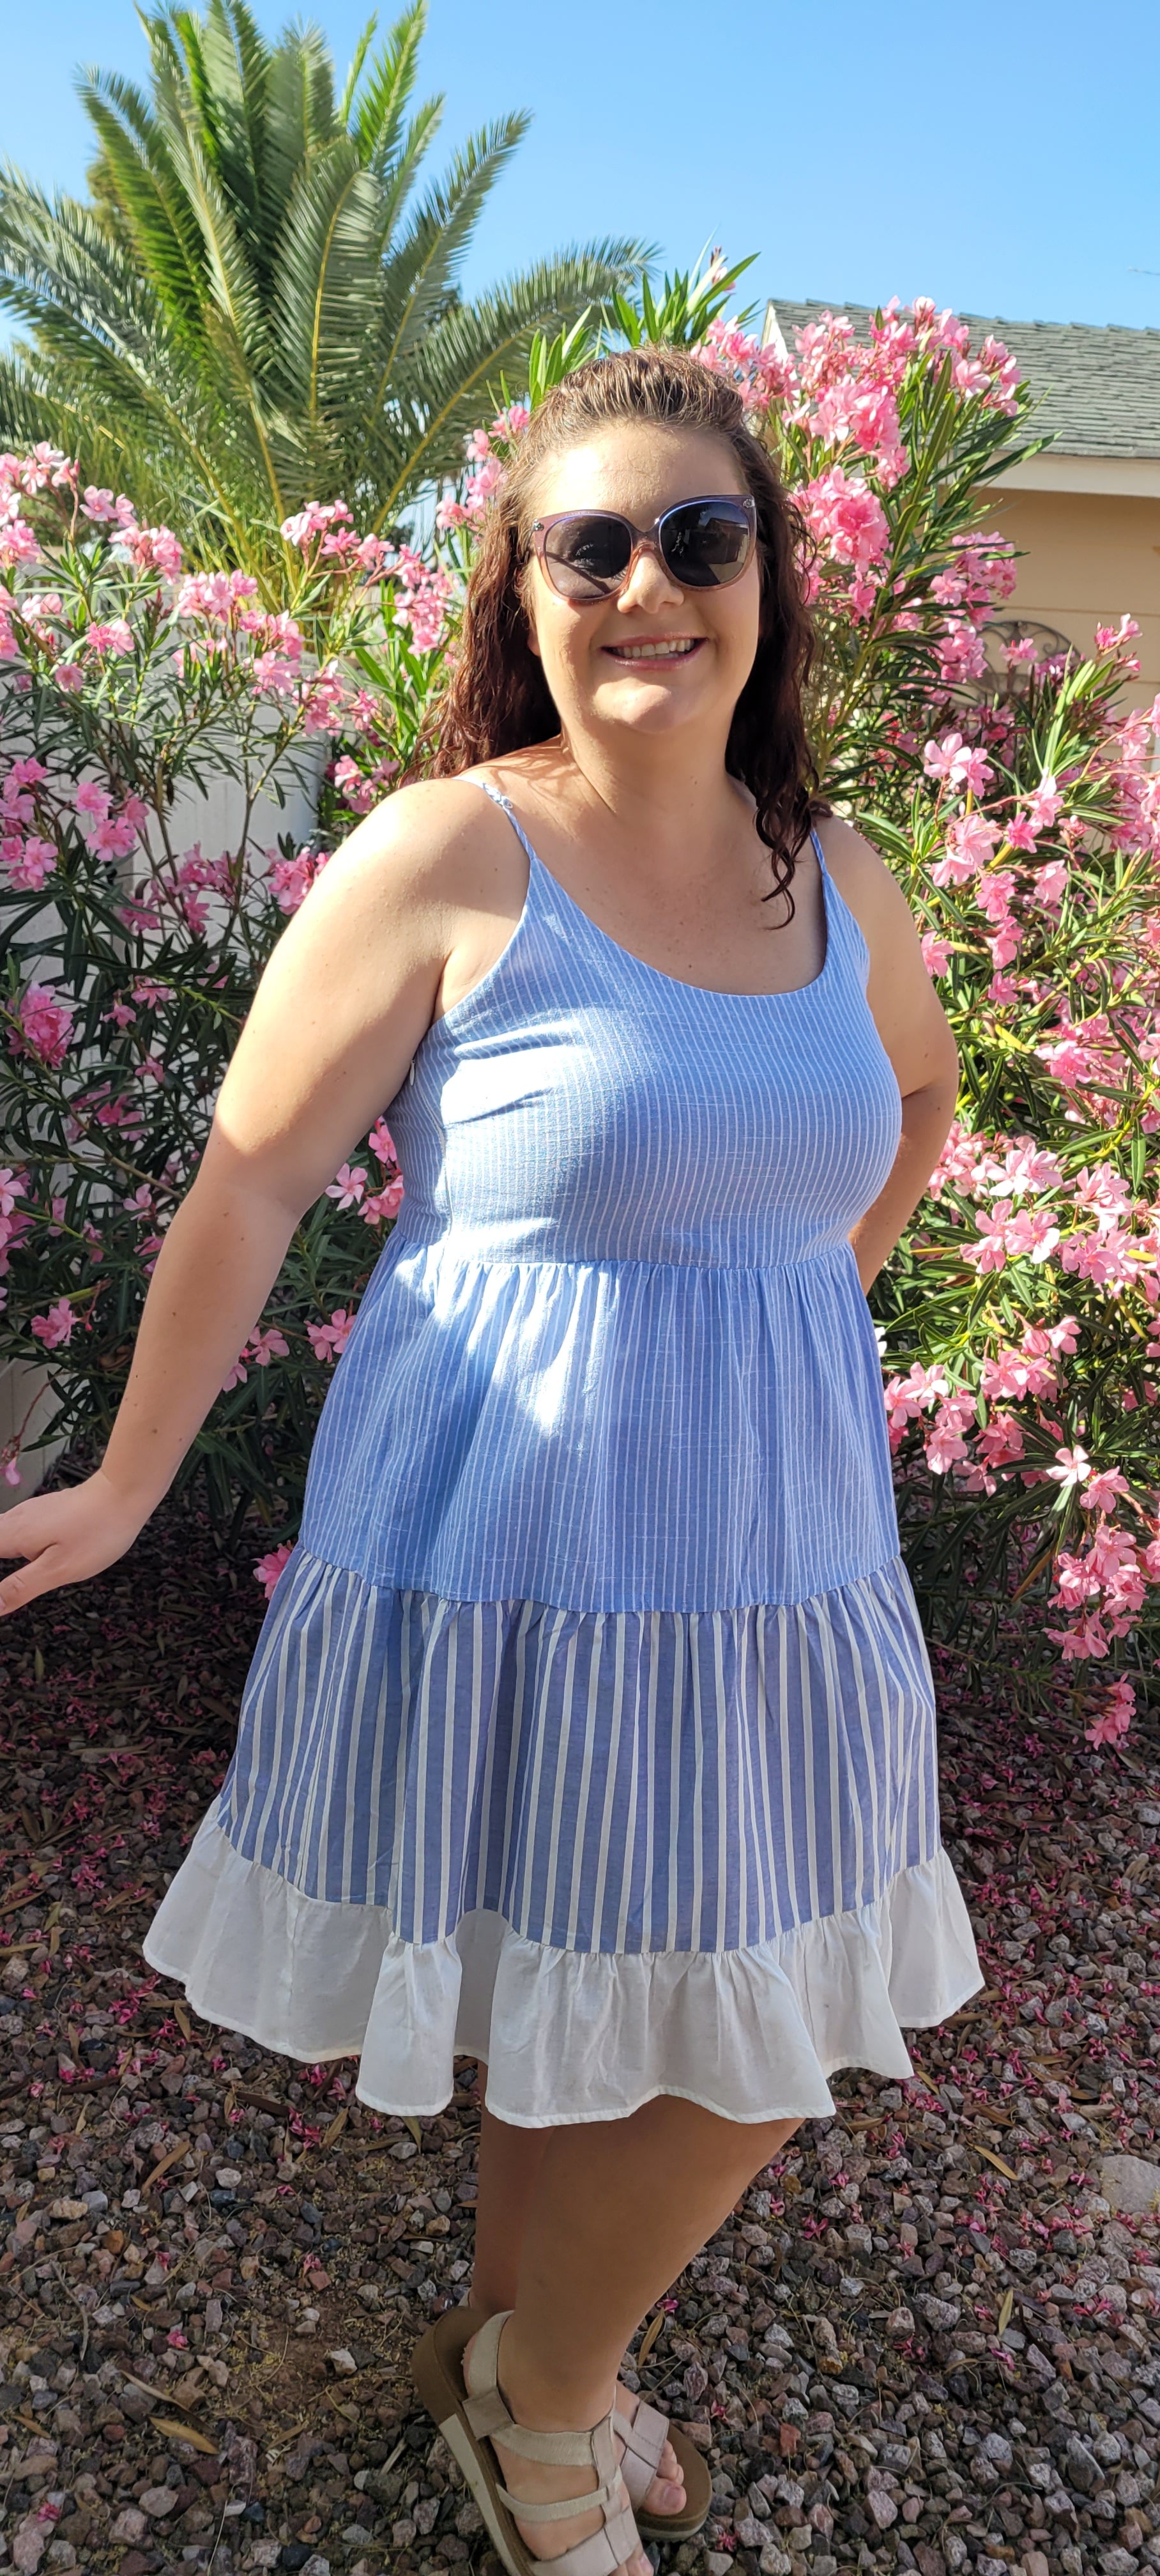 “Beach Hopper” is a midi dress with layers of tiered striped prints. This dress features a white ruffled hemline, adjustable straps, zipper on side with clasp closure, scoop neckline and back, it is lined and does not have stretch. This dress is perfect for a beach getaway! Sizes small through large.